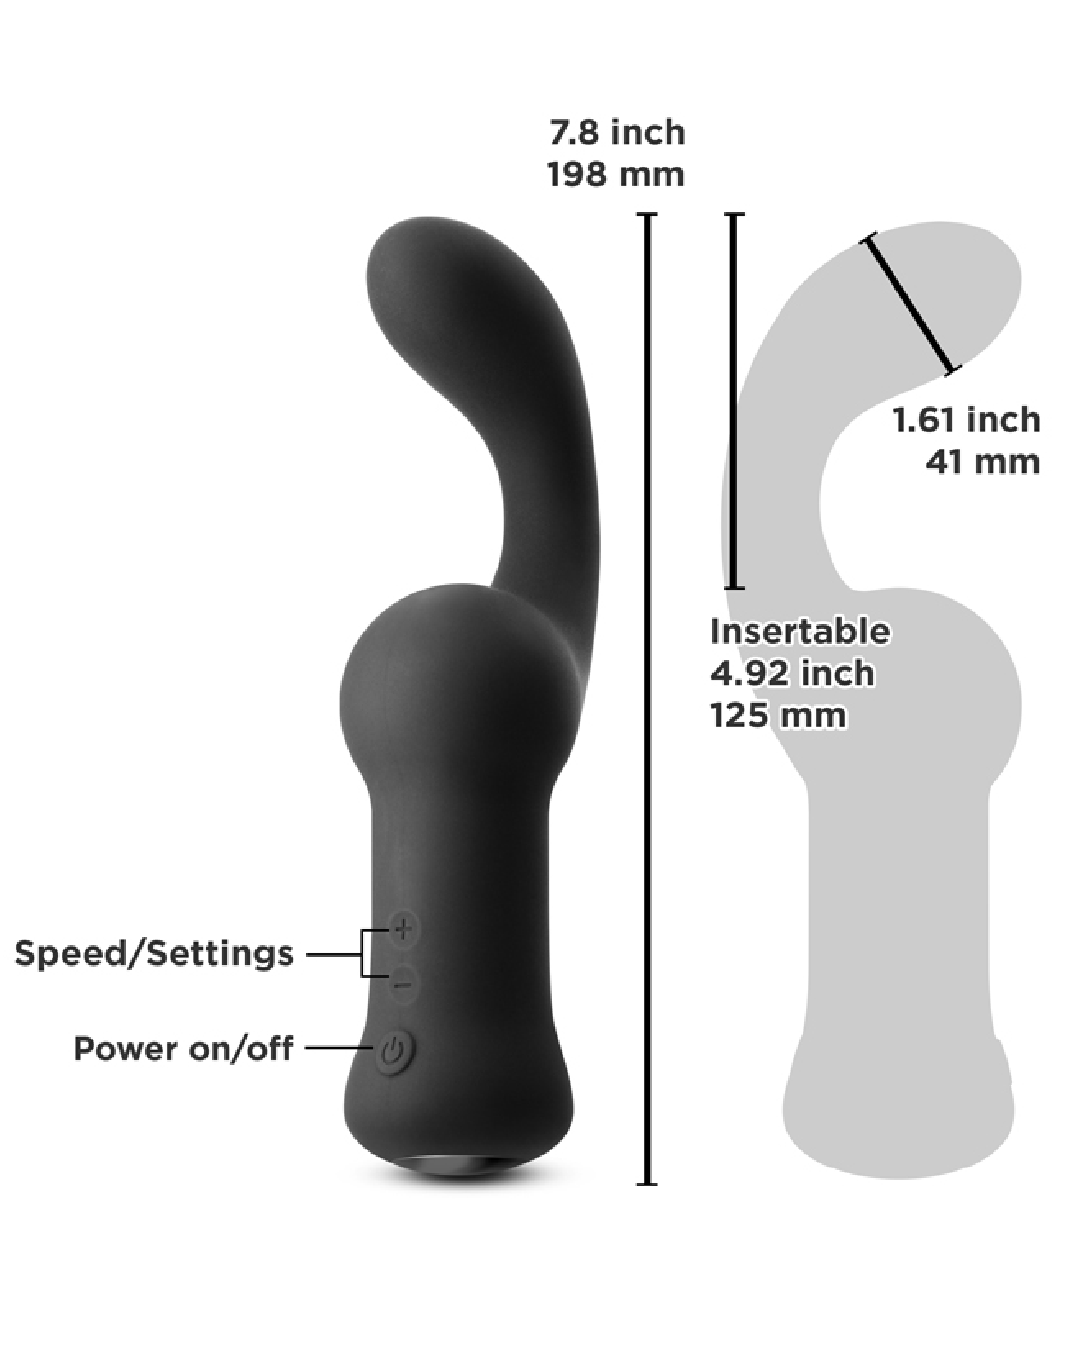 Renegade Curve Vibrating Prostate Massager graphic showing measurements 